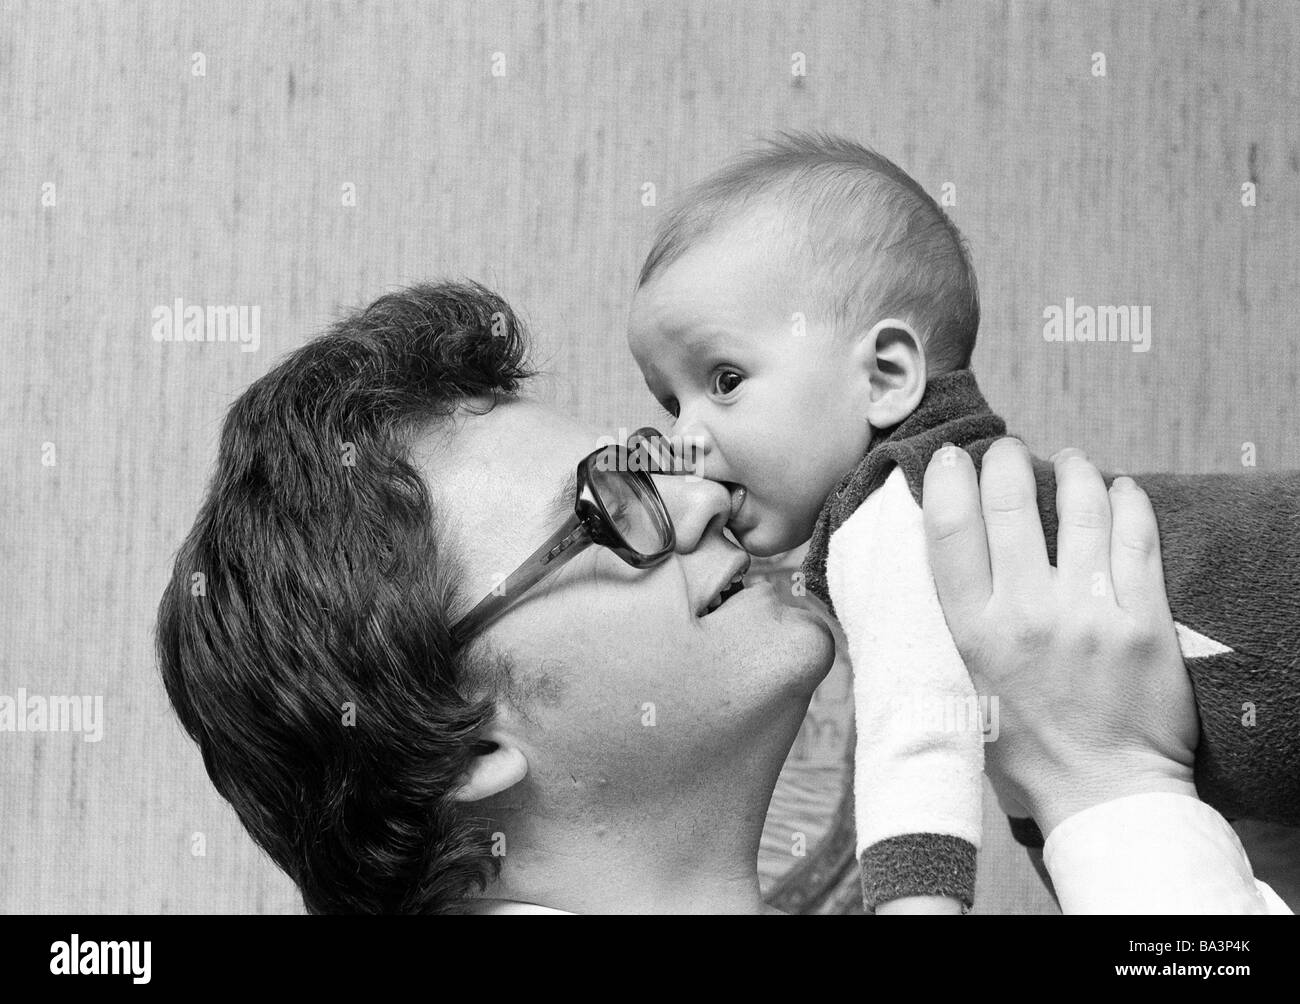 Seventies, black and white photo, people, young father carries the little son in his arms, aged 30 to 40 years, aged 1 to 2 years, Werner, Andreas Stock Photo